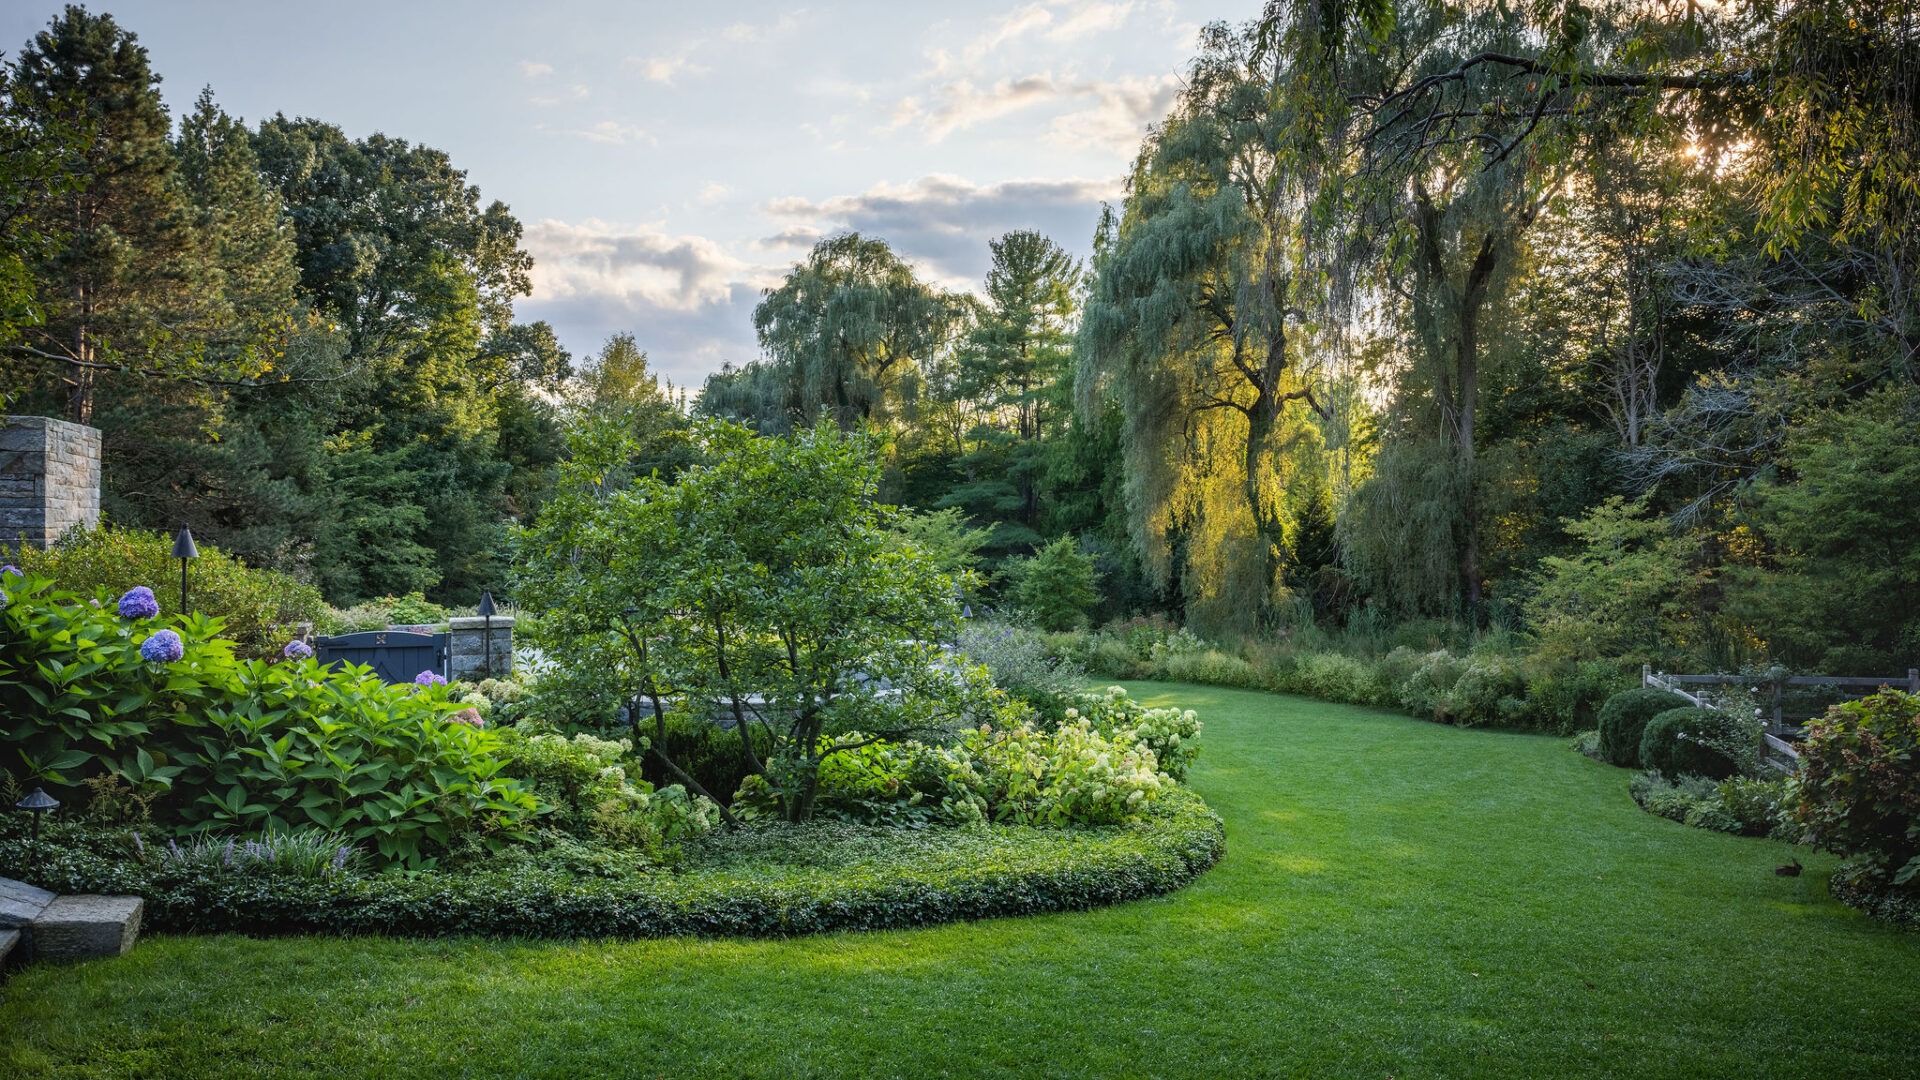 The image features a serene garden with lush green grass, trimmed hedges, flowering shrubs, and weeping trees, bathed in soft sunlight.